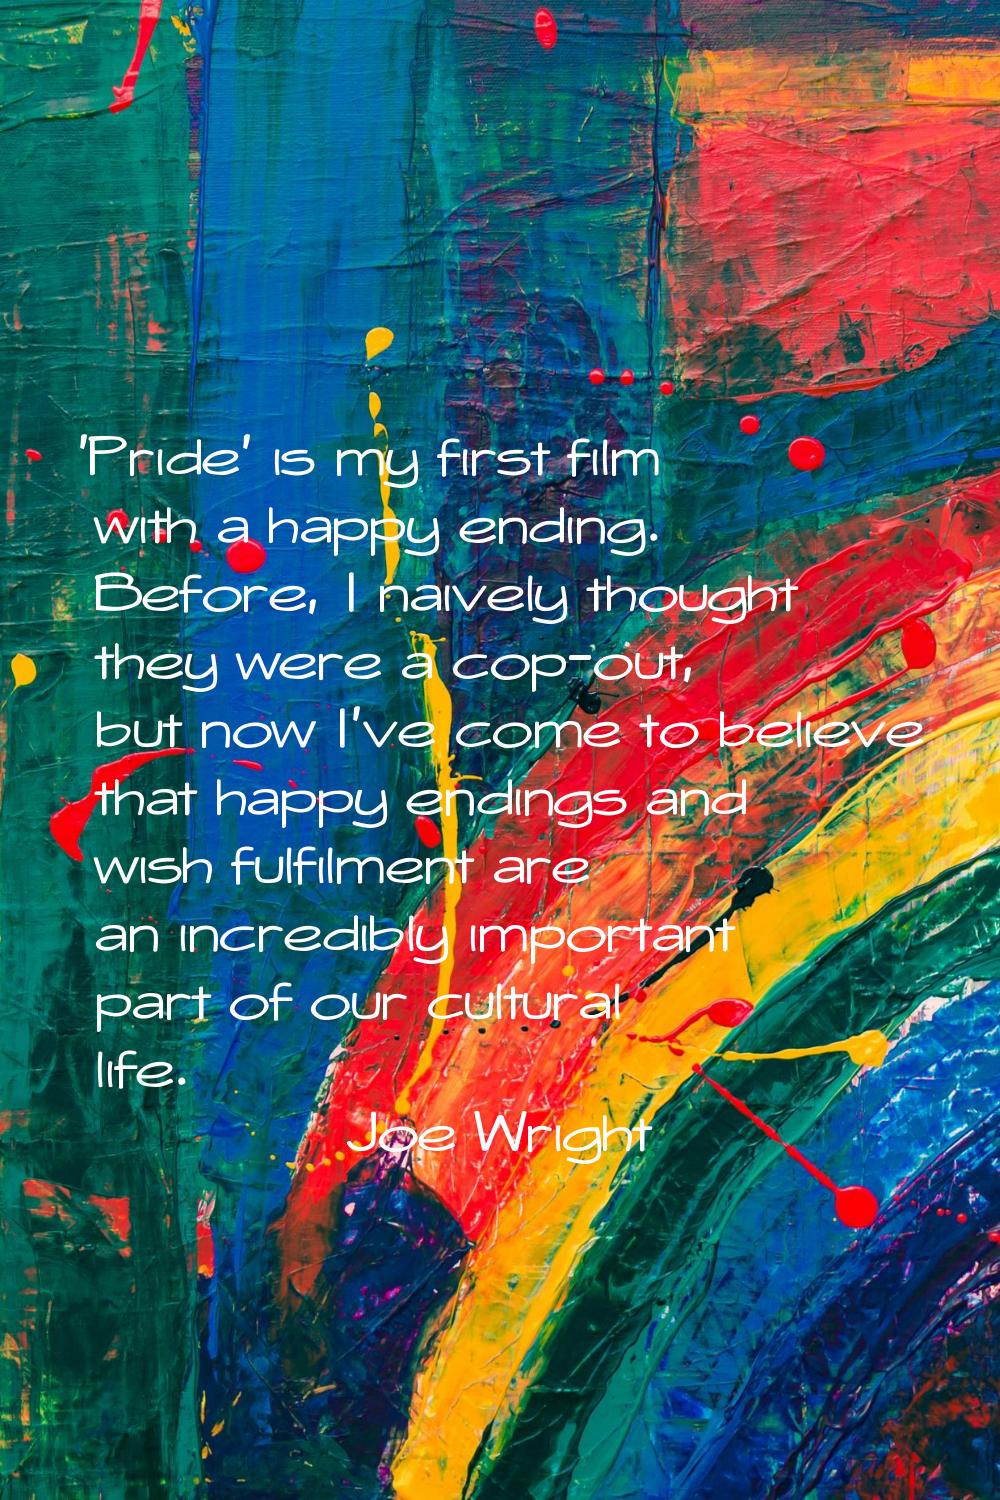 'Pride' is my first film with a happy ending. Before, I naively thought they were a cop-out, but no